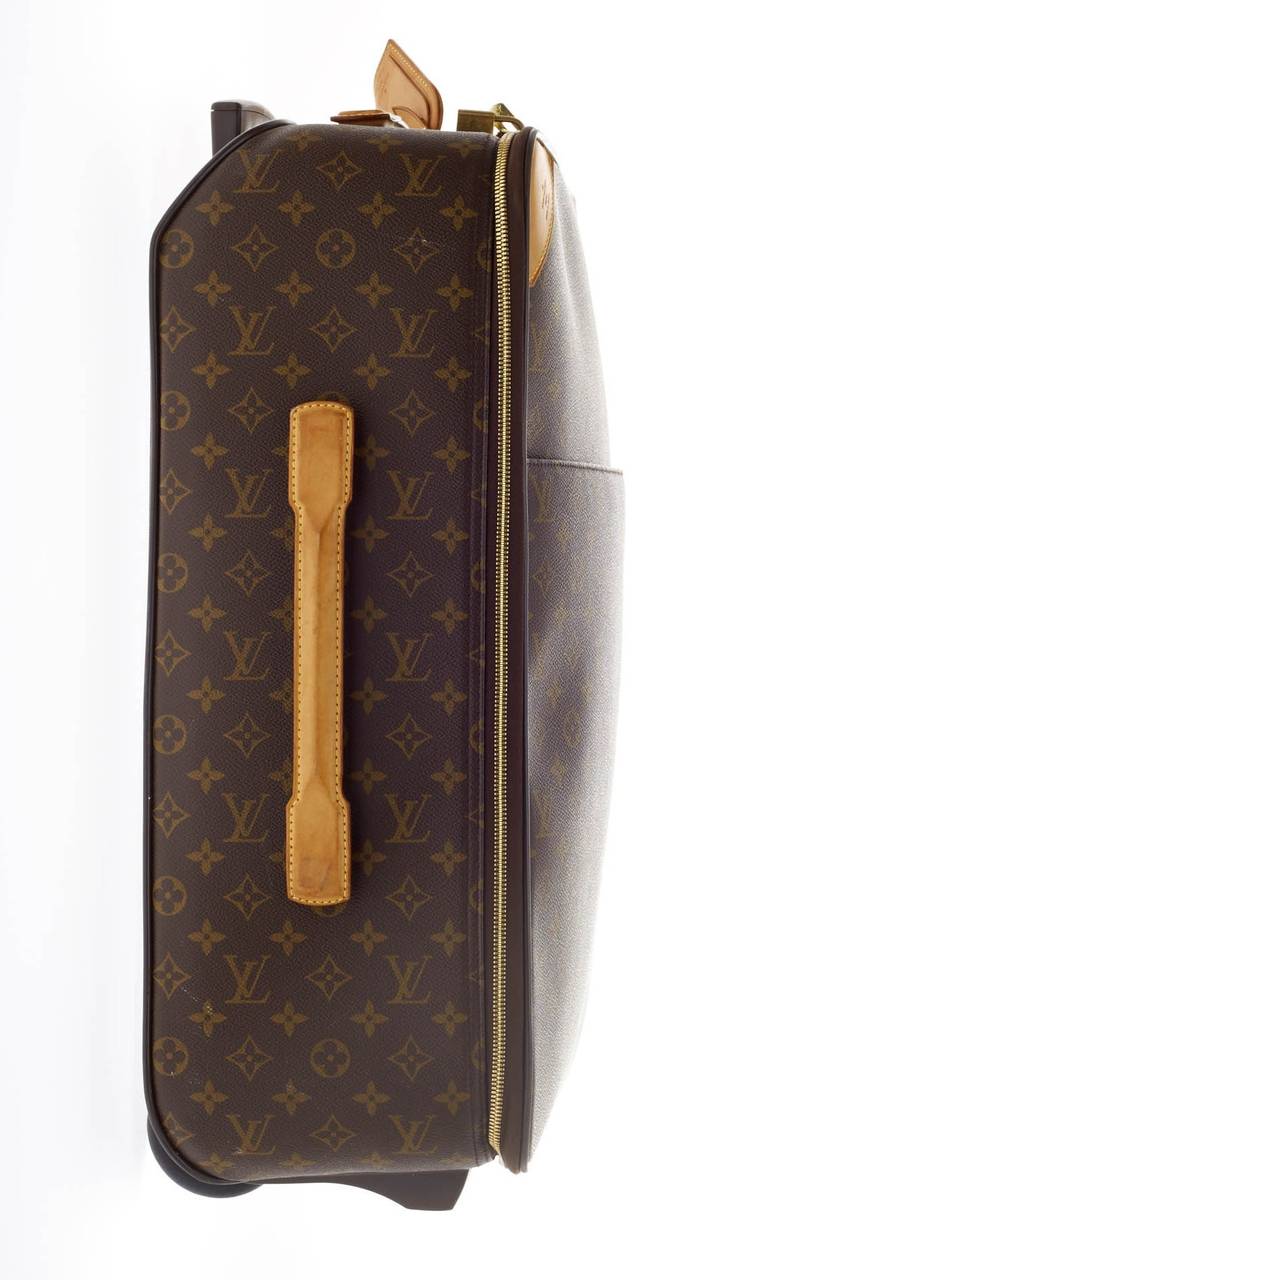 This authentic Louis Vuitton Pegase Monogram Canvas 55 is a sleek and sturdy suitcase for all your travels. Crafted from Louis Vuitton's iconic monogram canvas exterior, this functional luggage features cowhide leather trimmings and luggage tags,